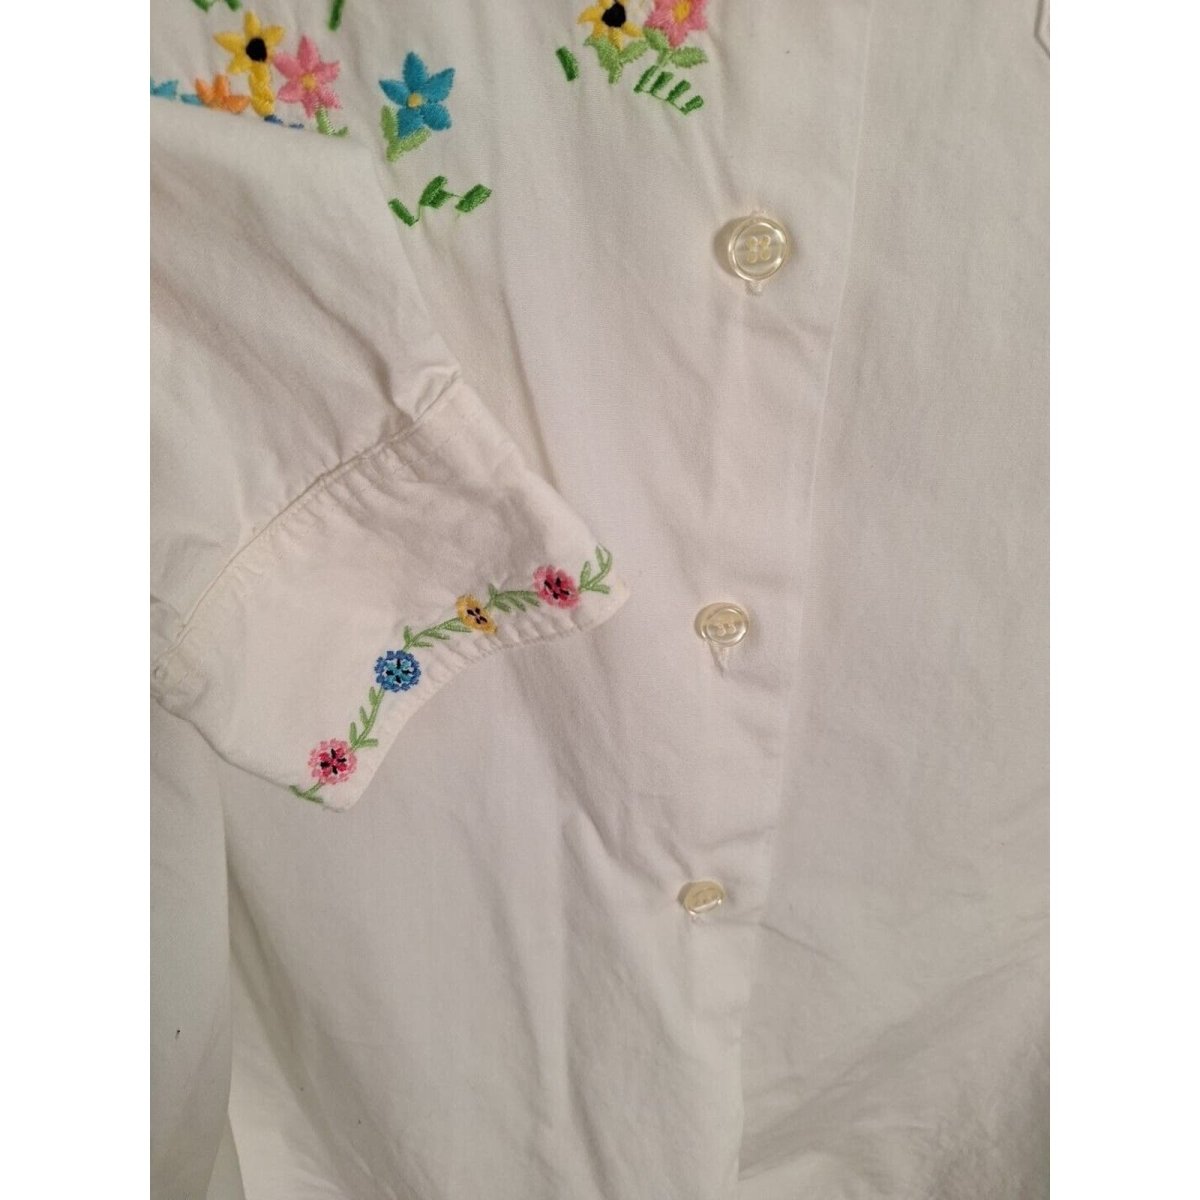 Vintage 80s/90s White Floral Garden Button Up Shirt Women Size 14 L/XL 42" to 48" - themallvintage The Mall Vintage 1980s 1990s Capsule